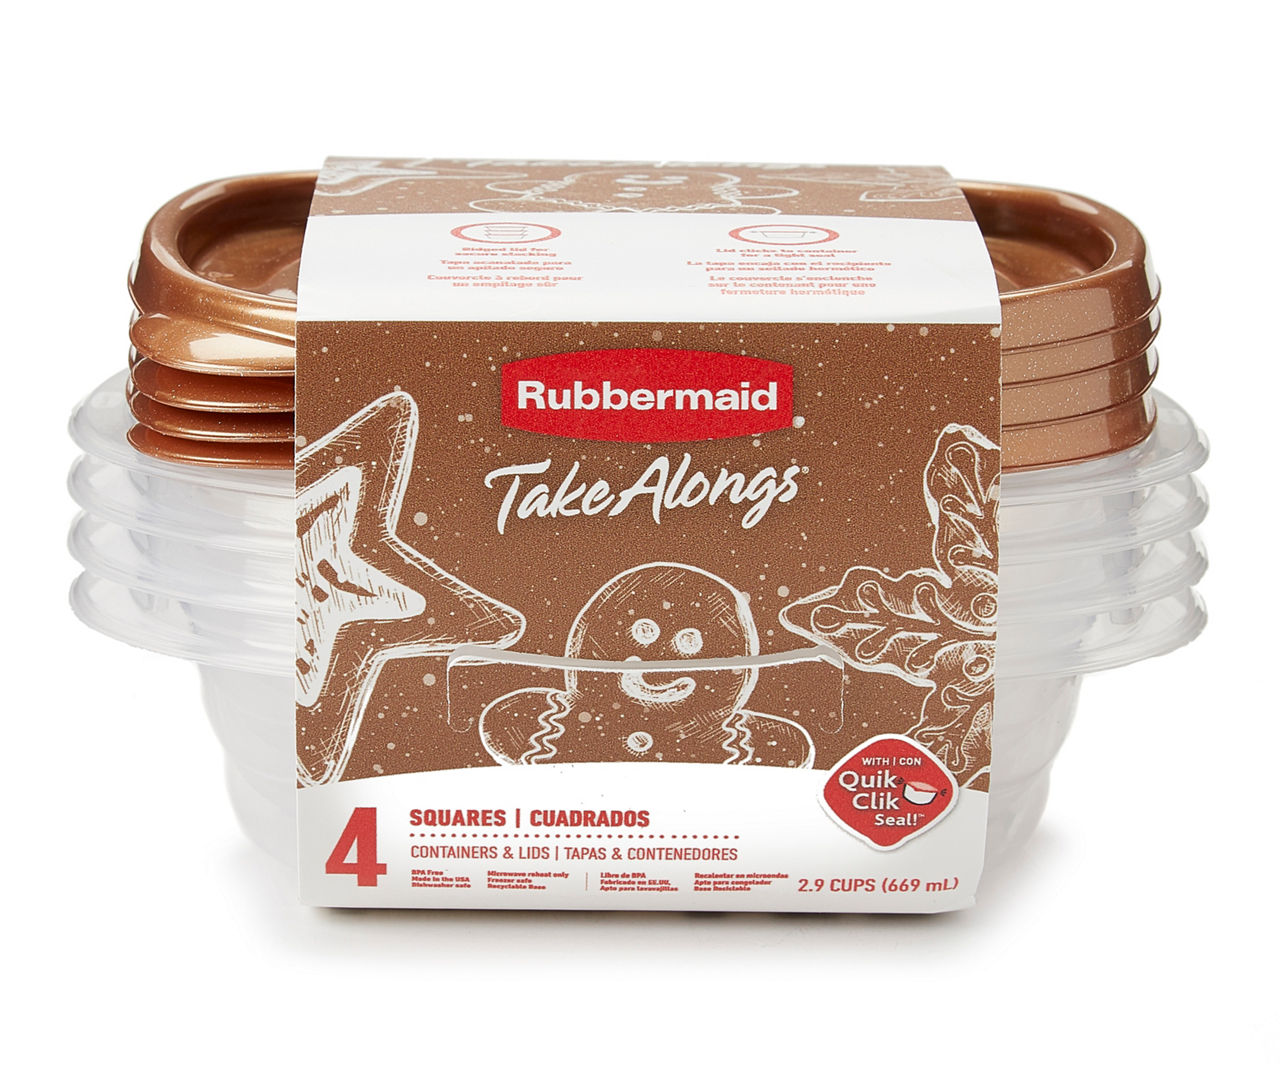 Rubbermaid Take-Along Rectangular Container - 2 Pack - Toffee Nut, 1.1 gal  - Kroger